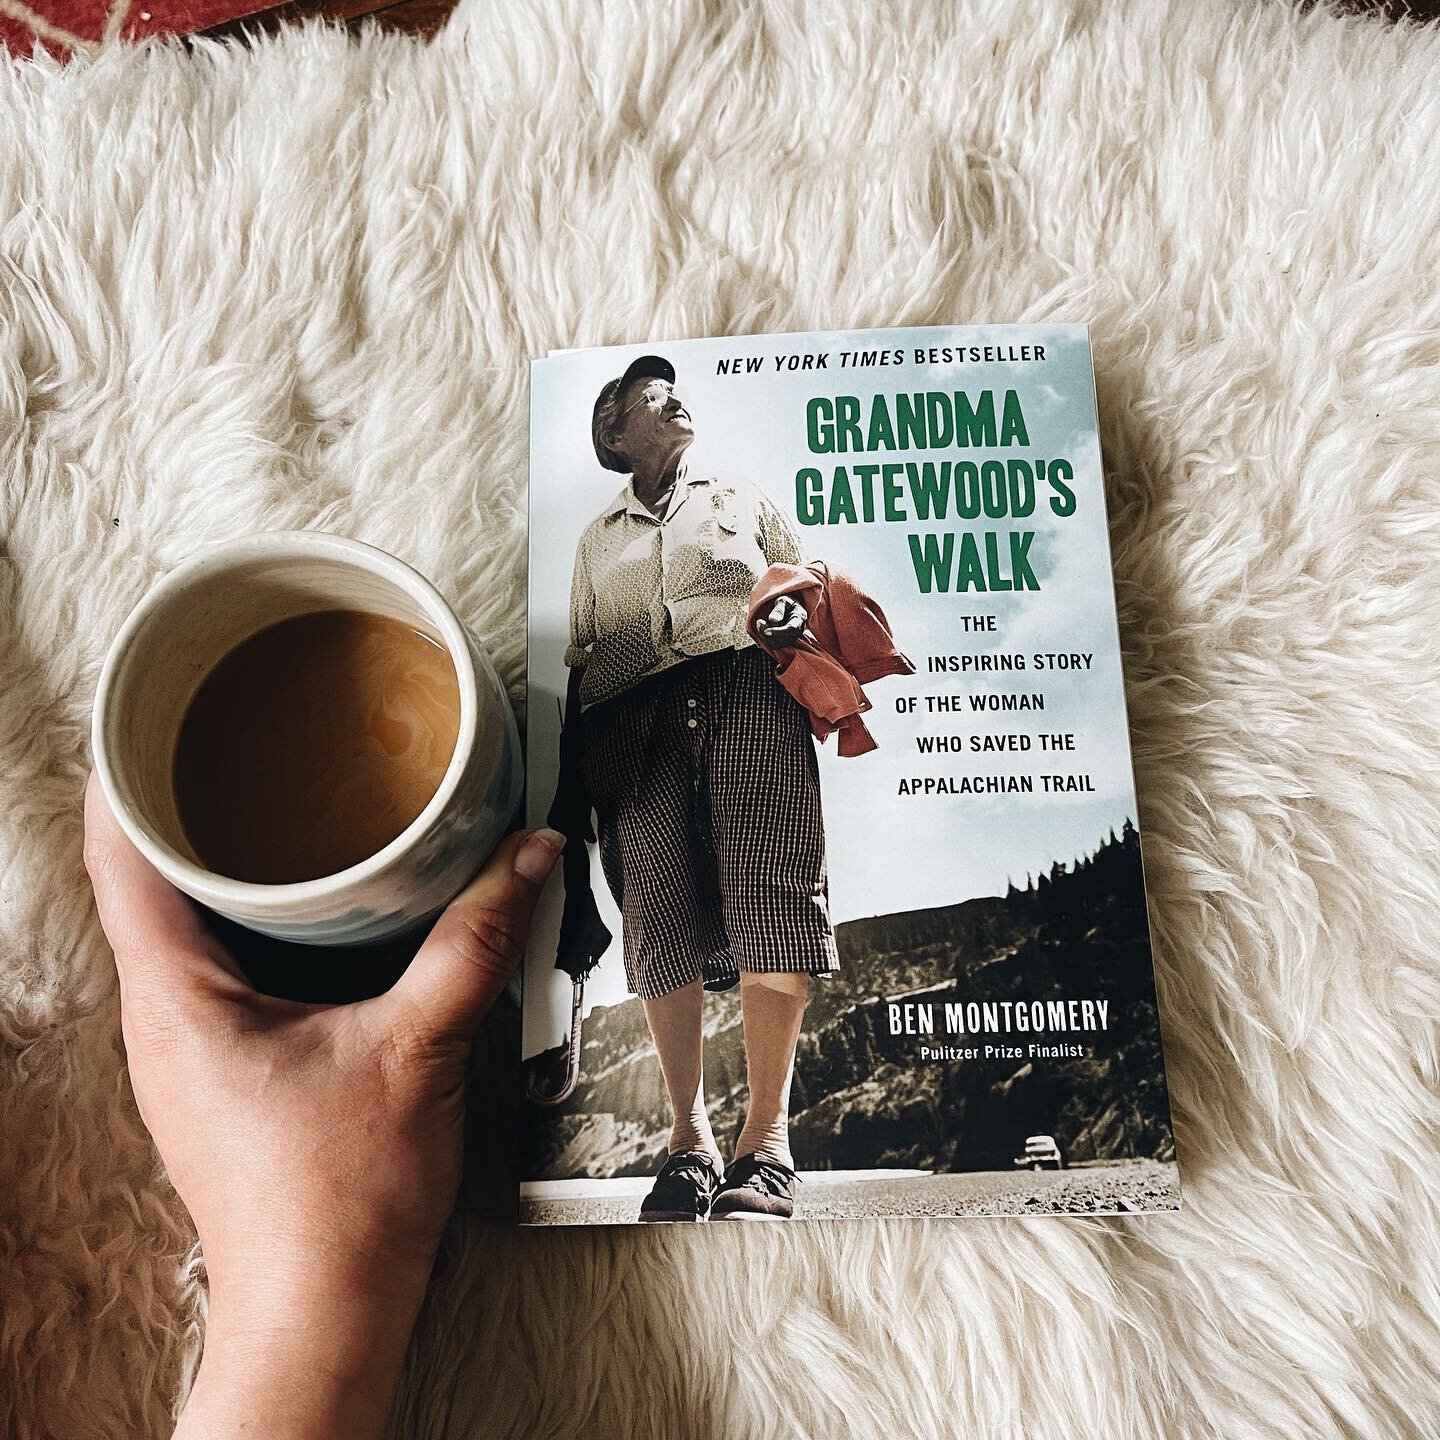 📚This book was an inspiring read in a sea of male memoirs about hiking the Appalachian trail. Picked it up at the gift shop in Great Smoky Mountain National Park and finished it not a week later. At 67, girl hiked the 2,000 mile trail in tennis shoe